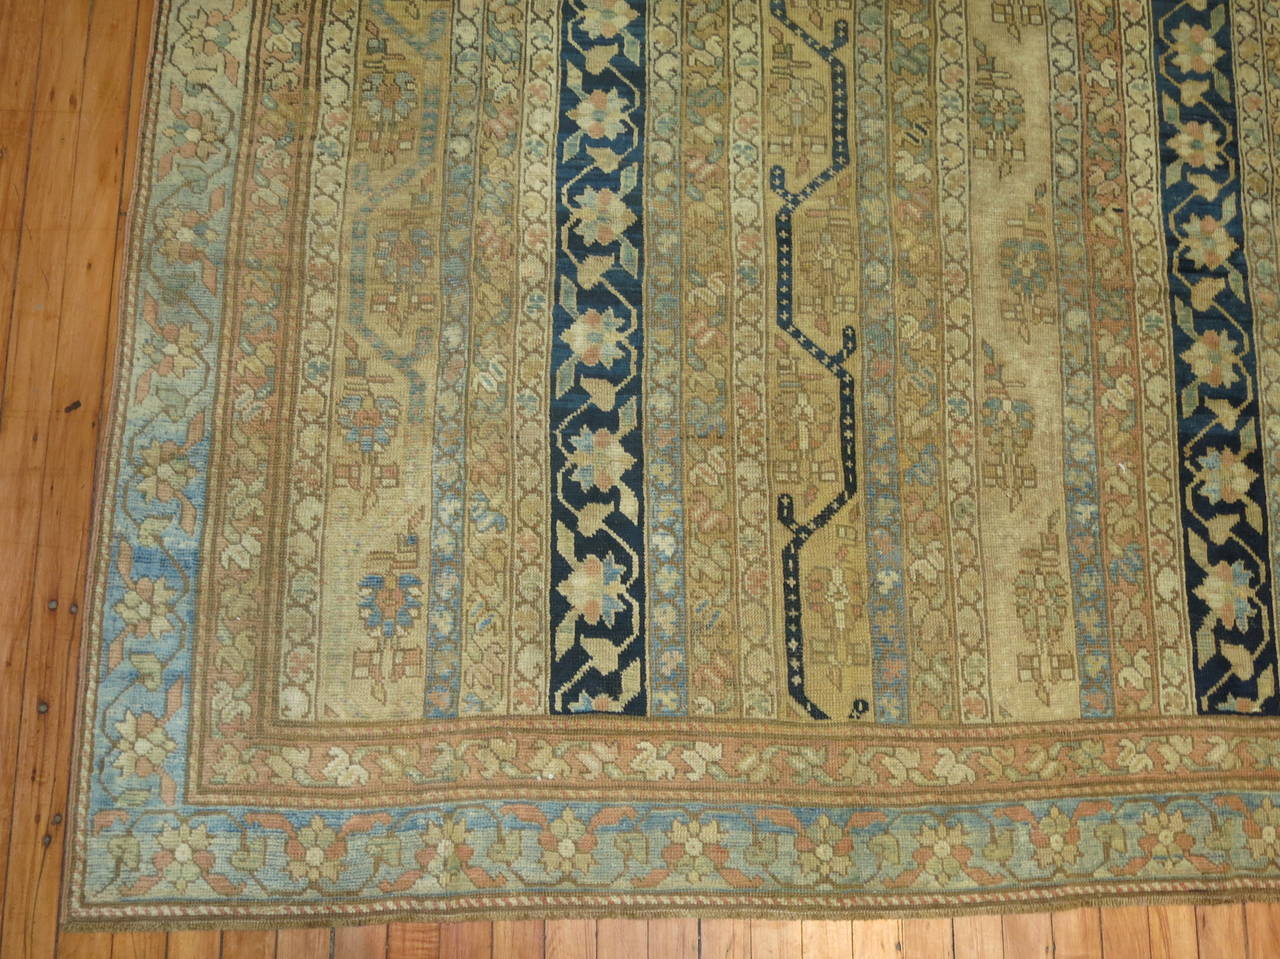 A fine gallery size late 19th century Karabagh rug with an unusual all-over design of narrow vertical stripes in powder blue, steel blue, ivory, caramel and beige containing floral Meander, scrolling vinery, and geometric motifs within a powder blue